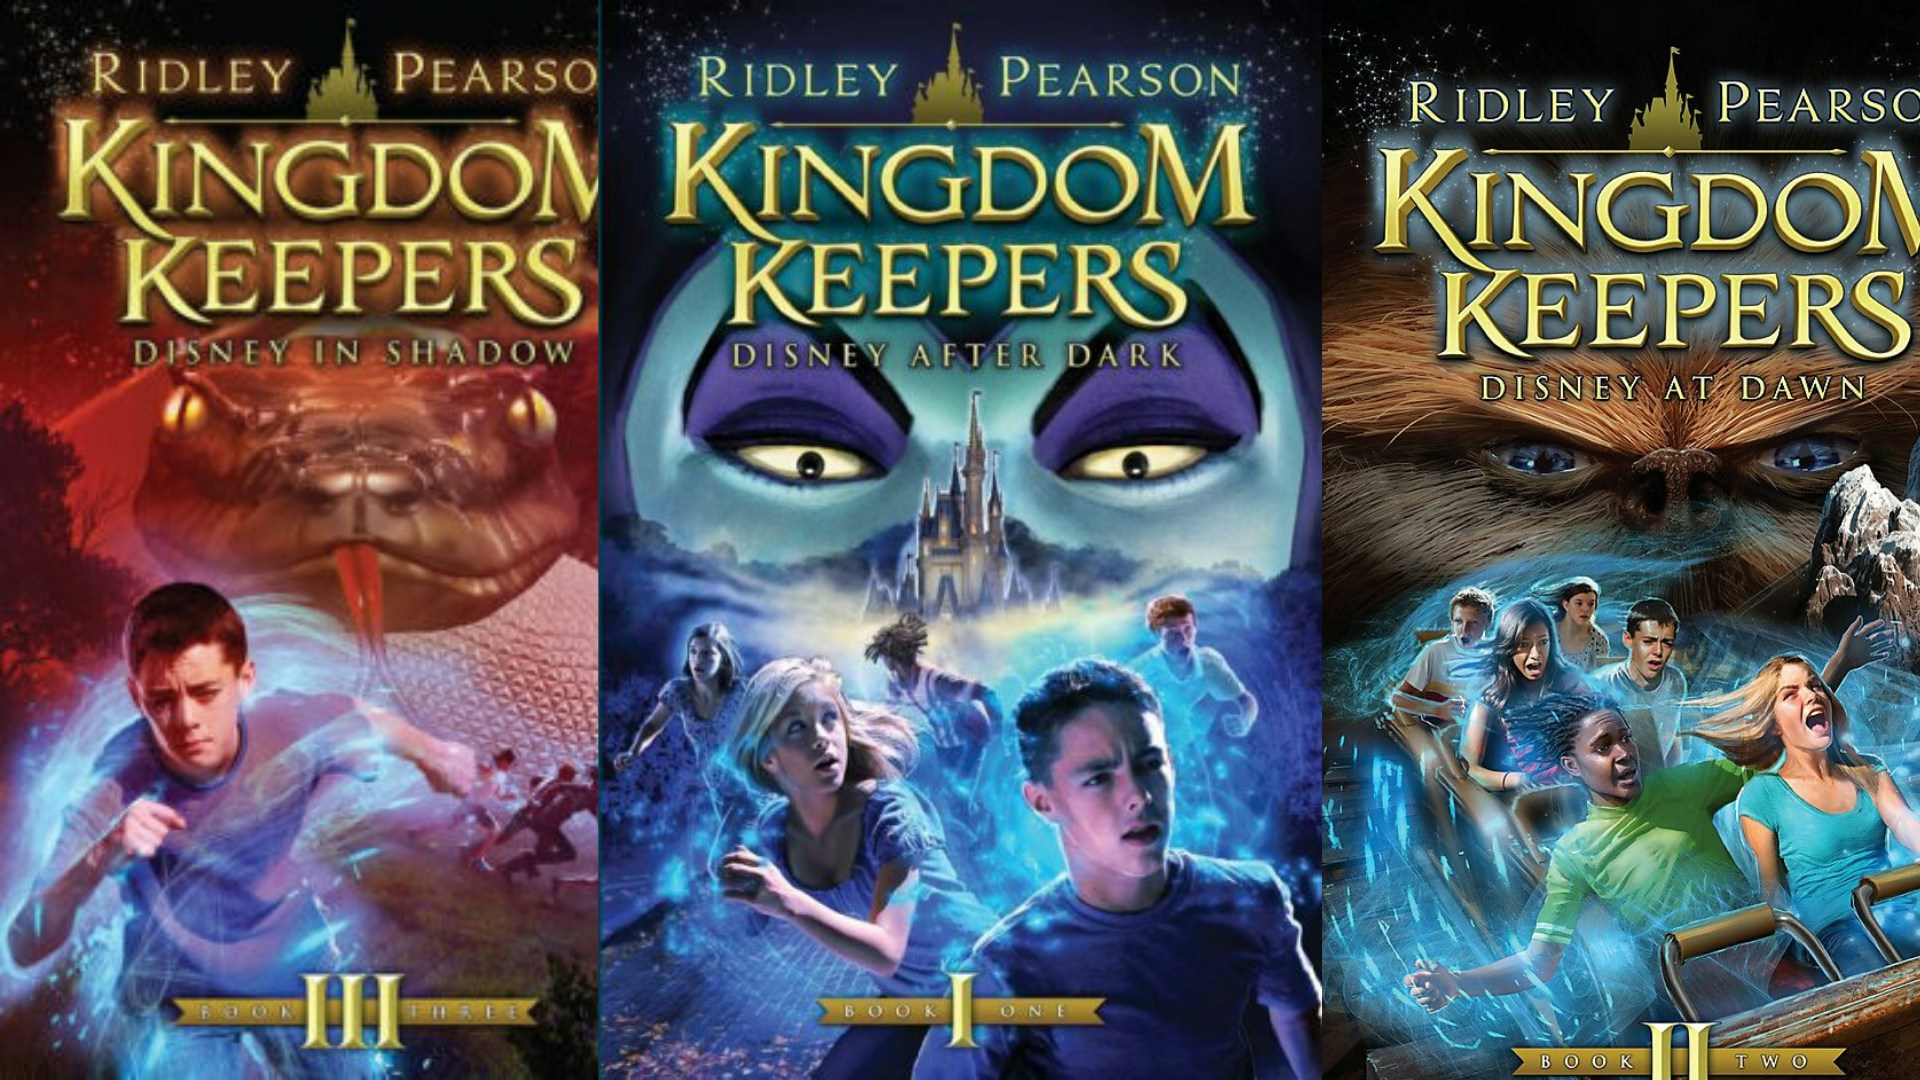 Ridley Pearson Rewriting Entire "Kingdom Keepers" Book Series to